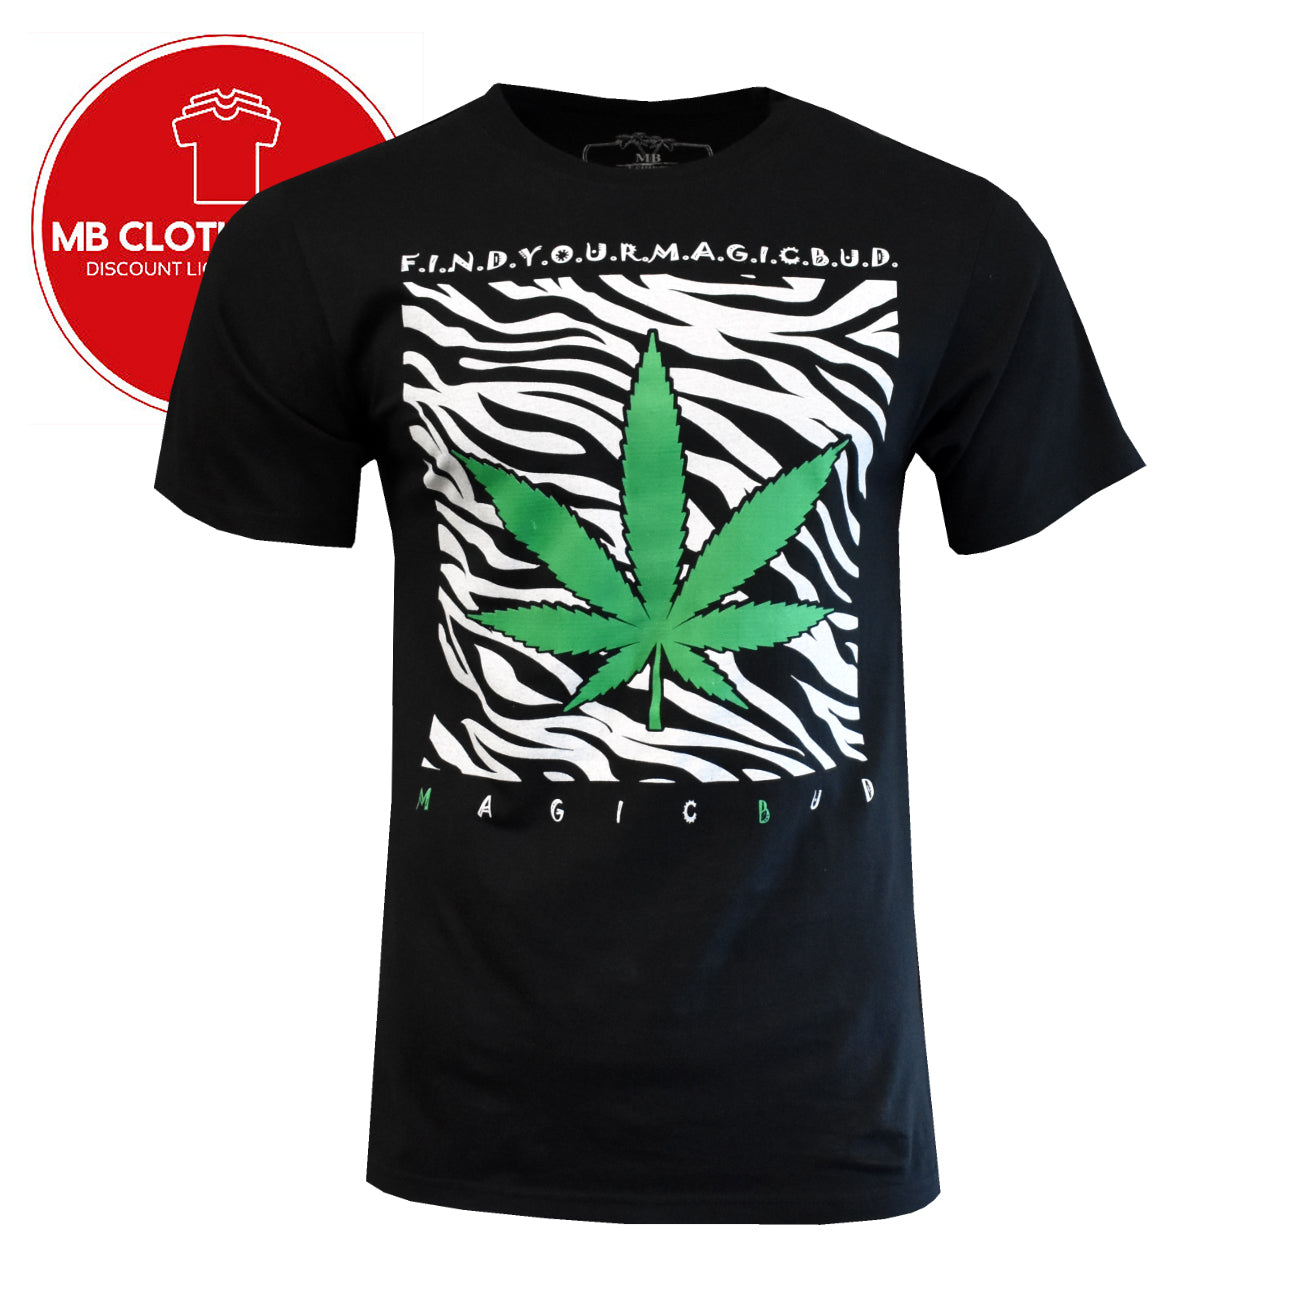 Men's T shirts Find Your Magic Bud Original MB T-Shirts 100% Cotton WEED